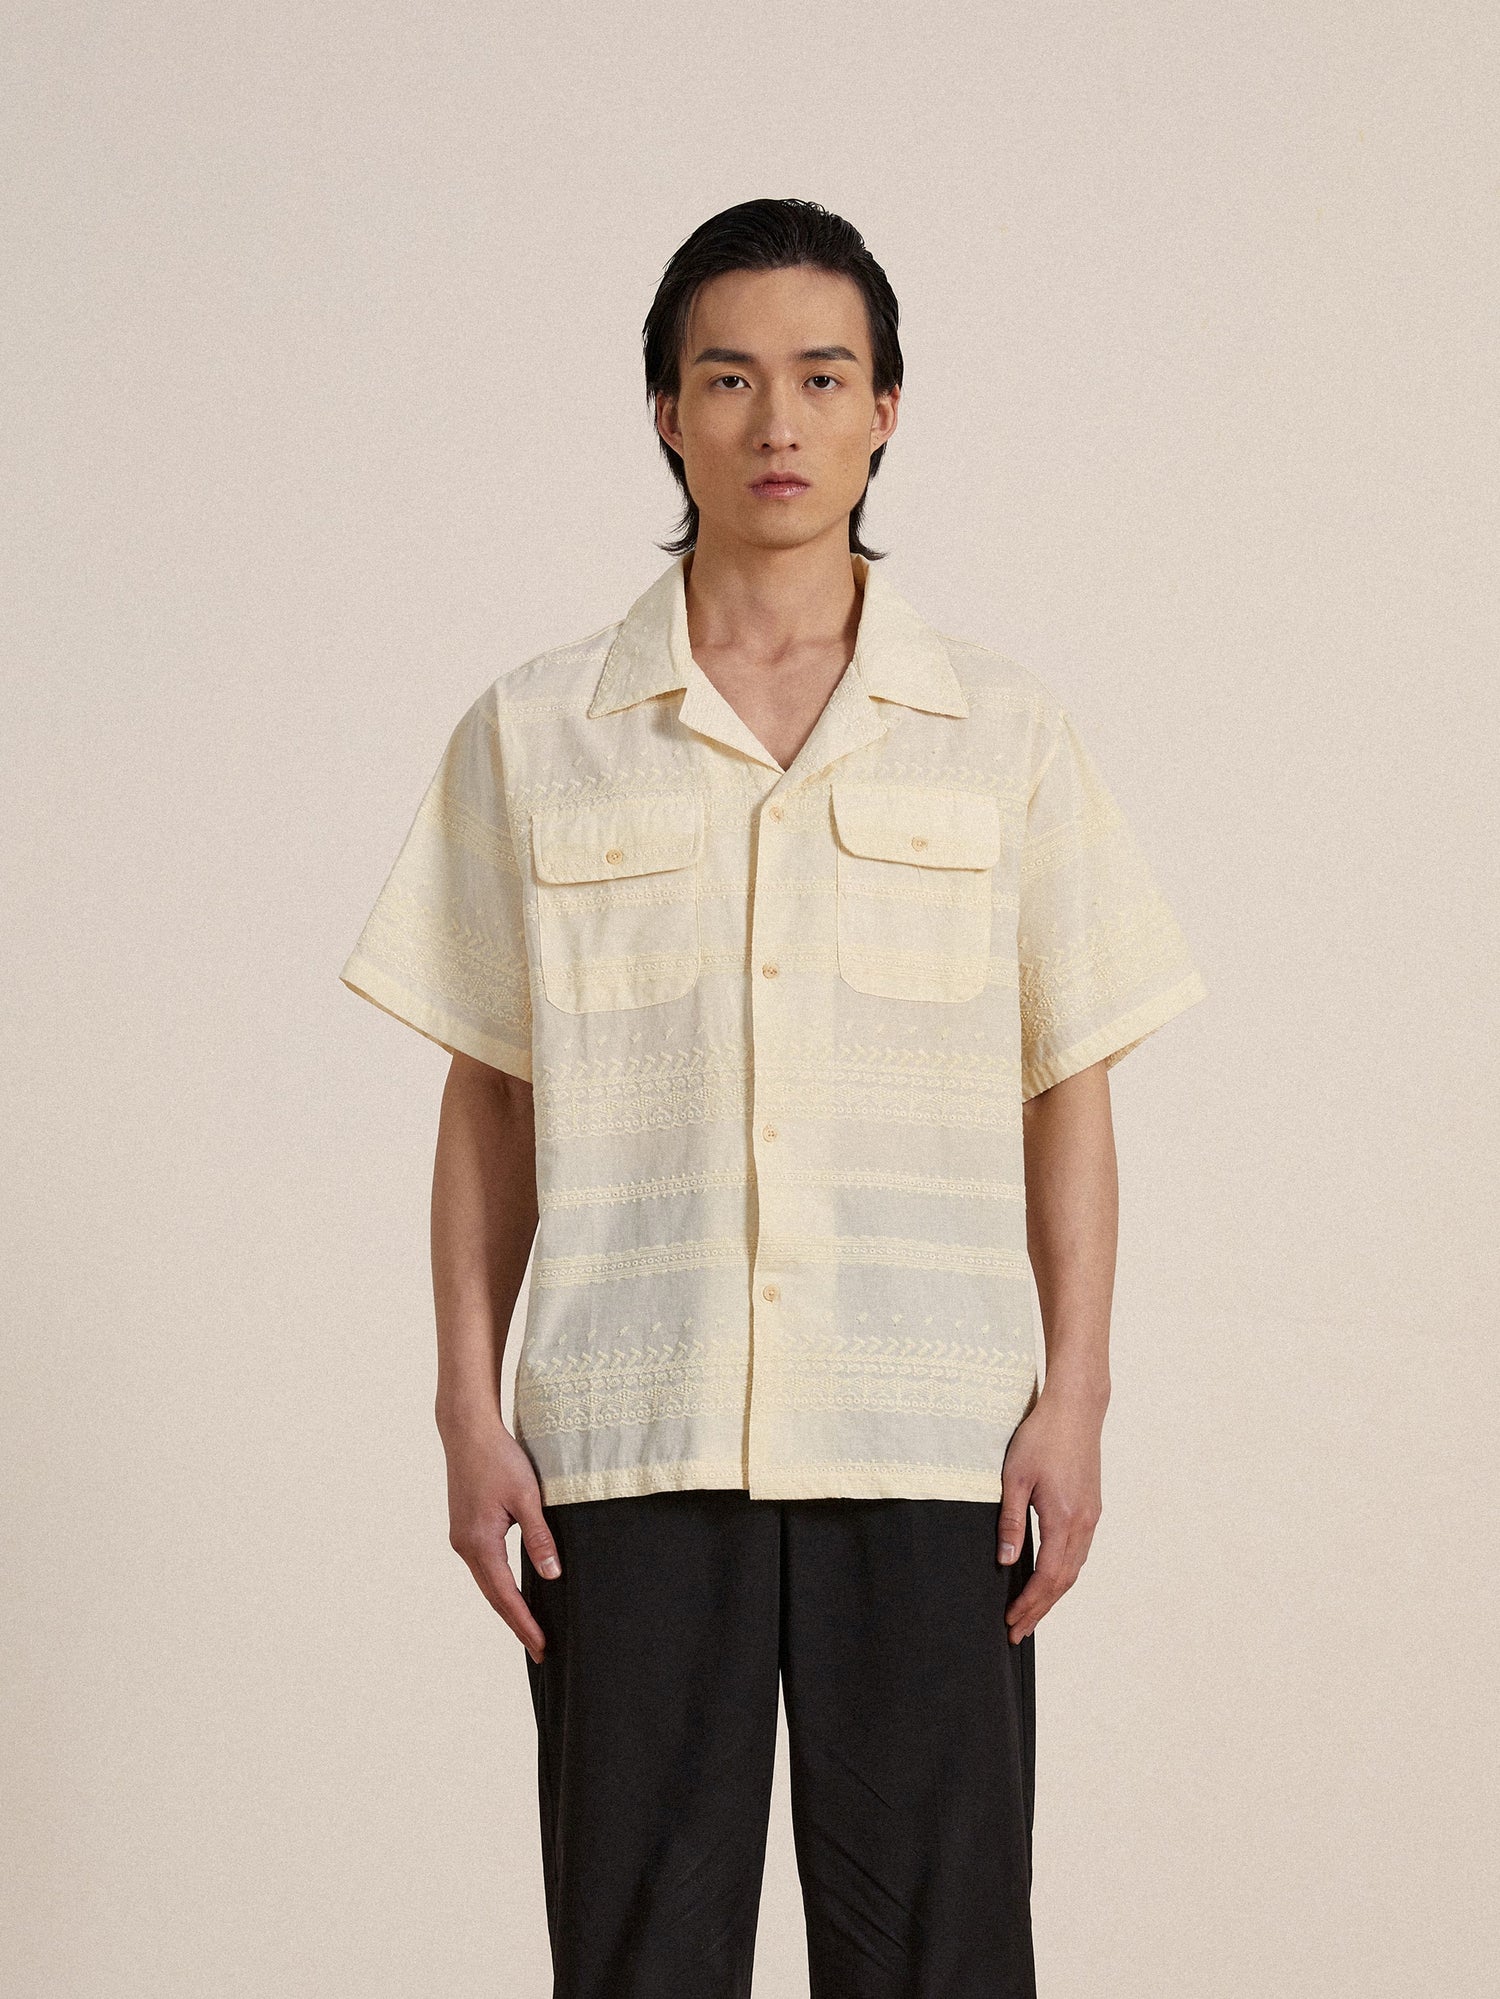 A man wearing a yellow Found Lace SS Camp Shirt with delicate lace detailing and black pants.